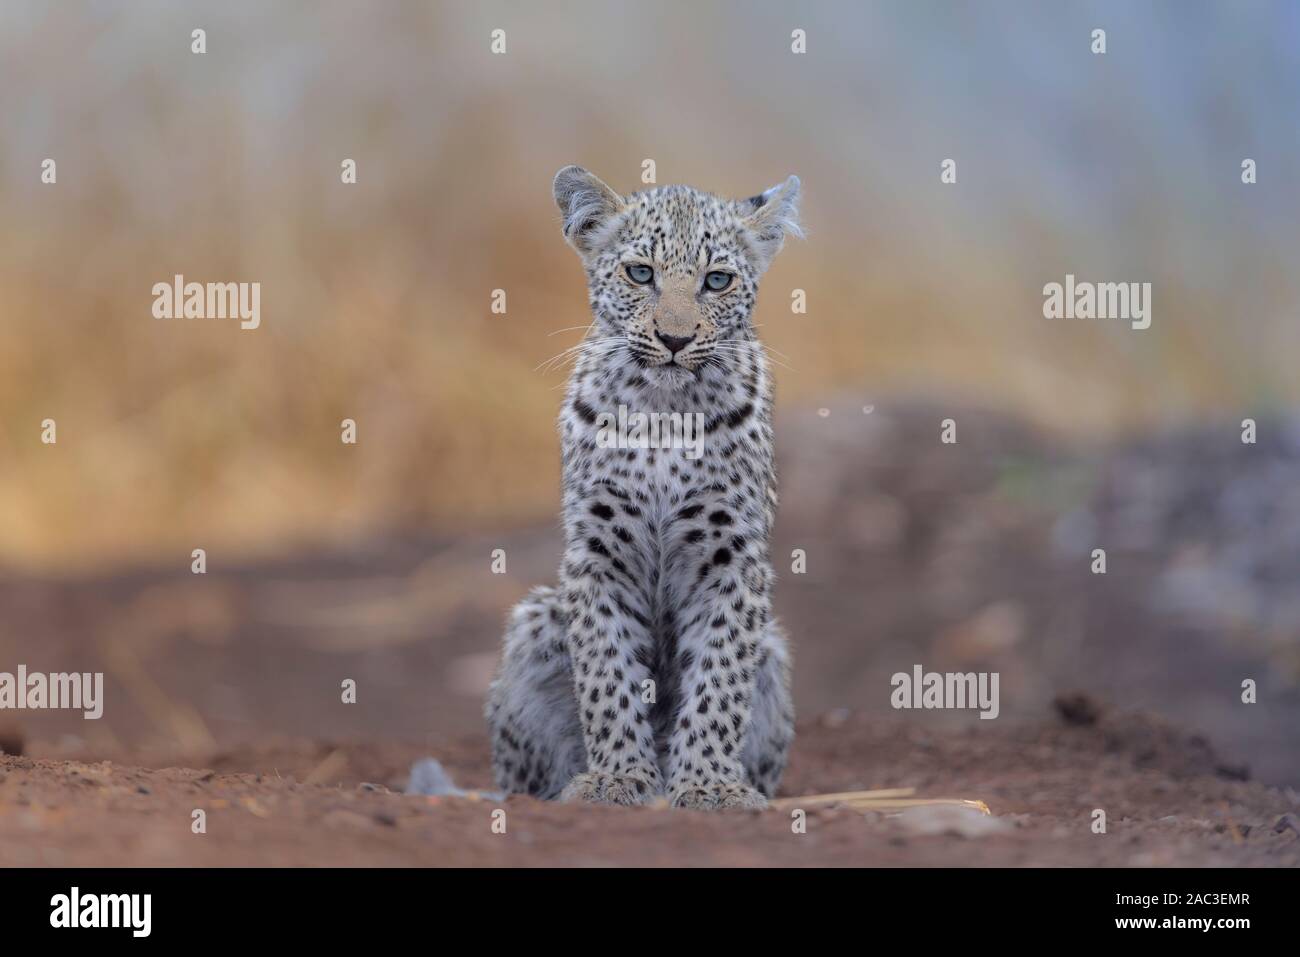 Baby leopard portrait with blue eyes Stock Photo